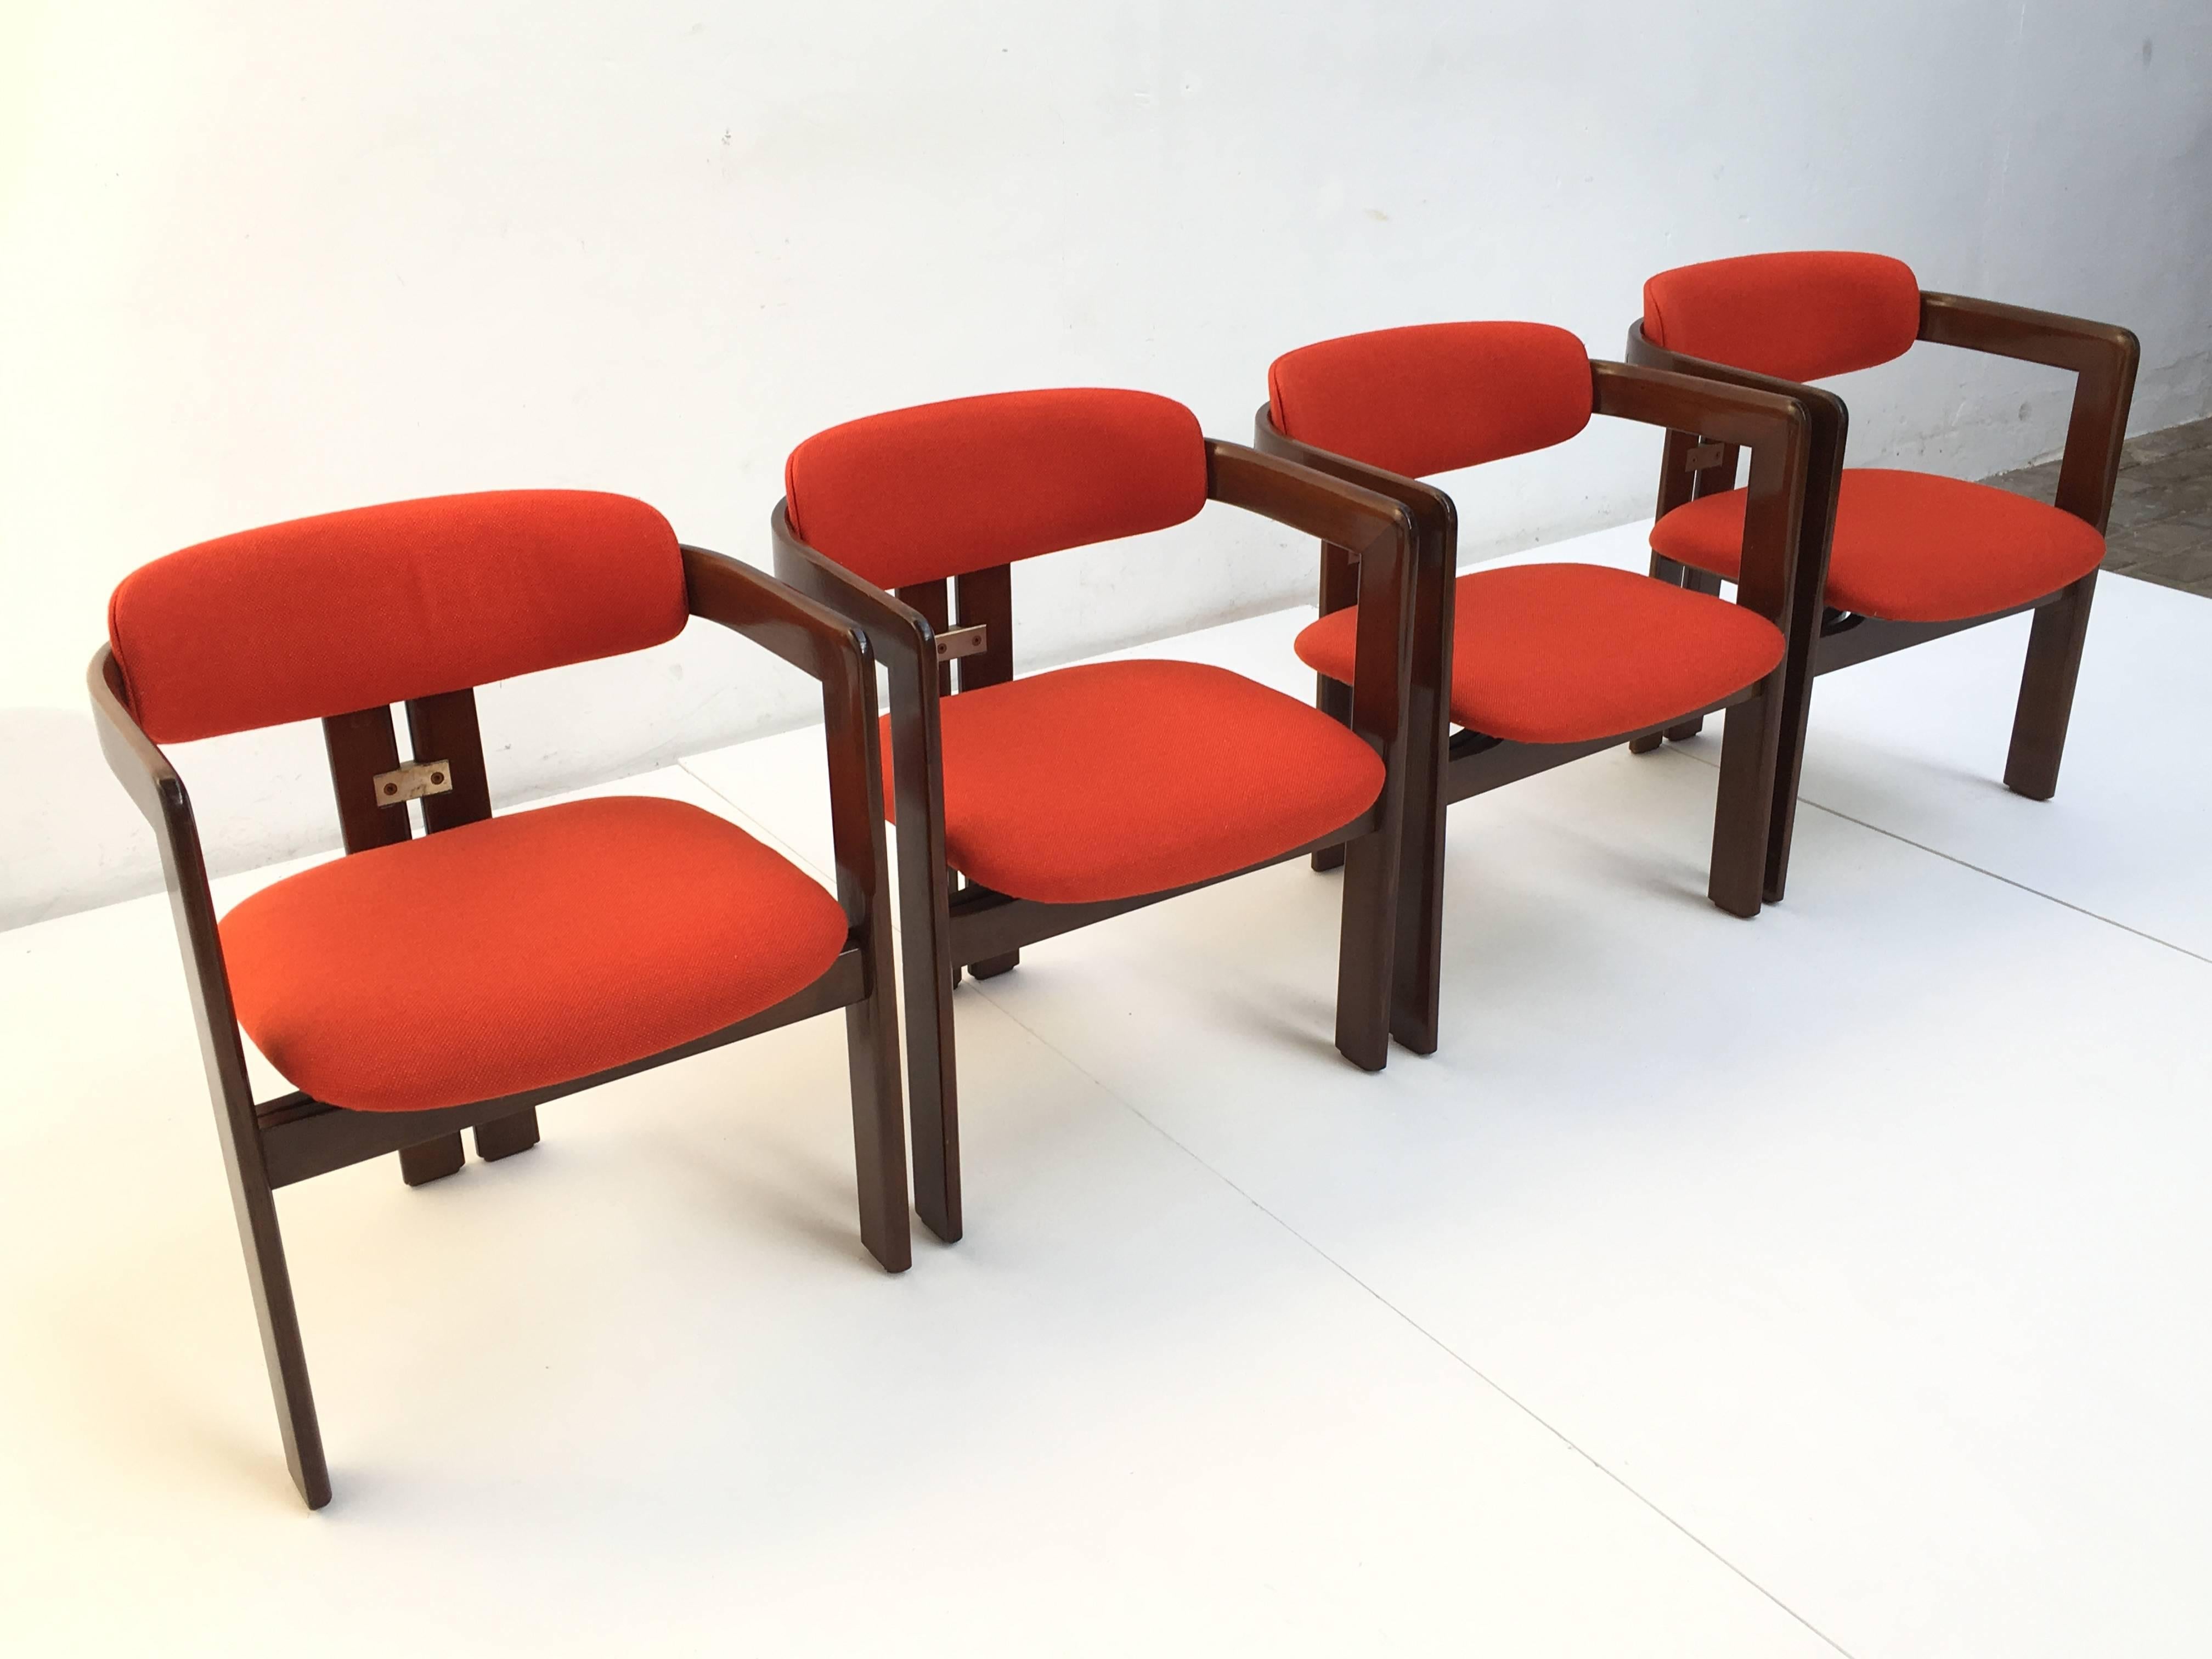 Superb set of four 'Pamplona' dining chairs finished in Italian walnut with wool seating by Italian master designer Augusto Savini for Pozzi, Italy, 1965.

The 'Pamplona 'chair has a refined sculptural form reminiscent of the elegant forms and